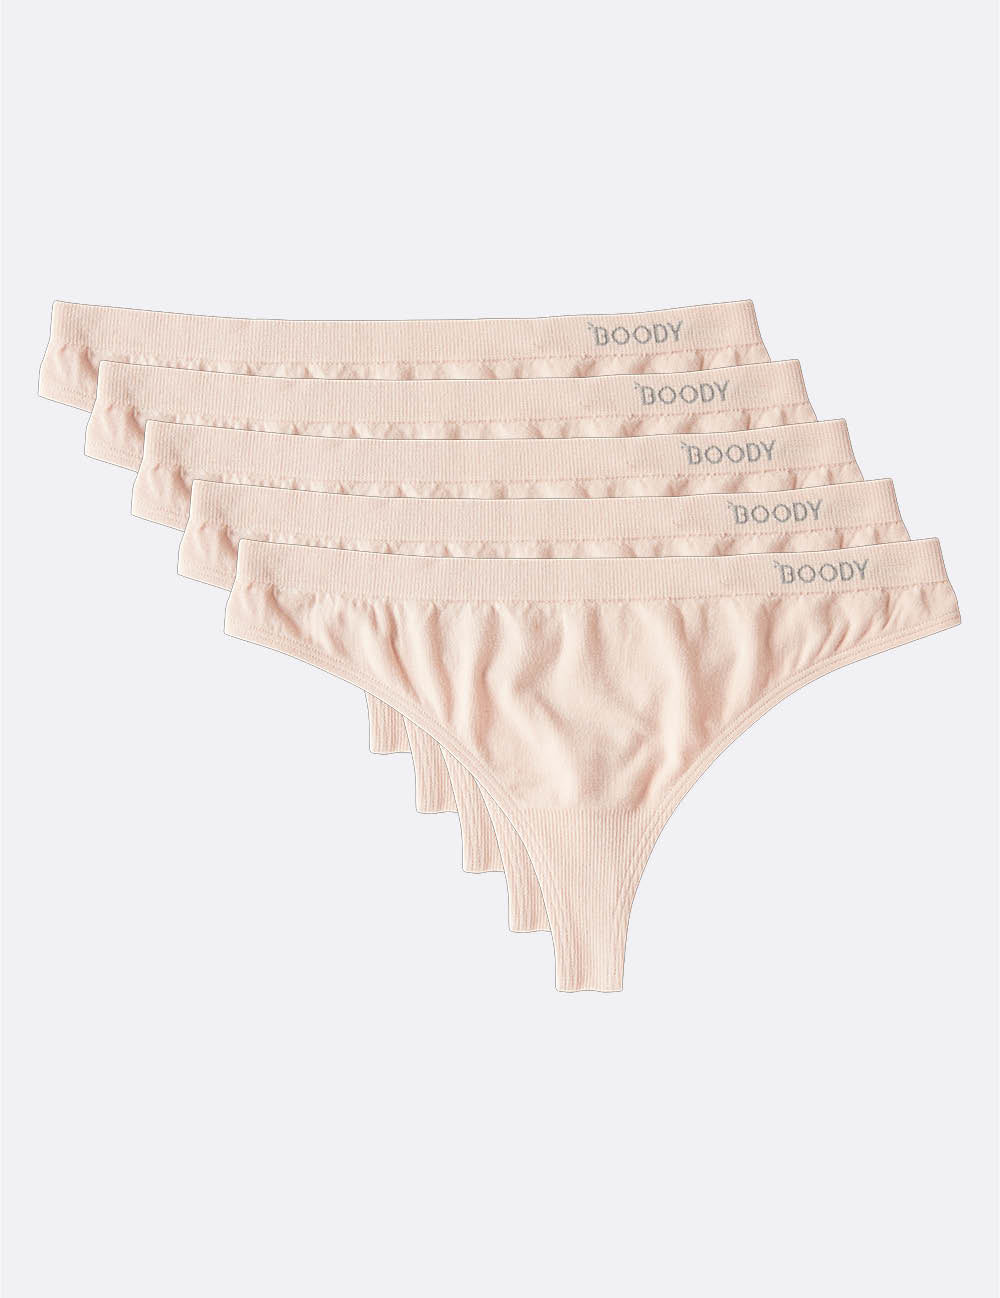 Boody Bamboo 5-pack Women's G-String Underwear in Nude